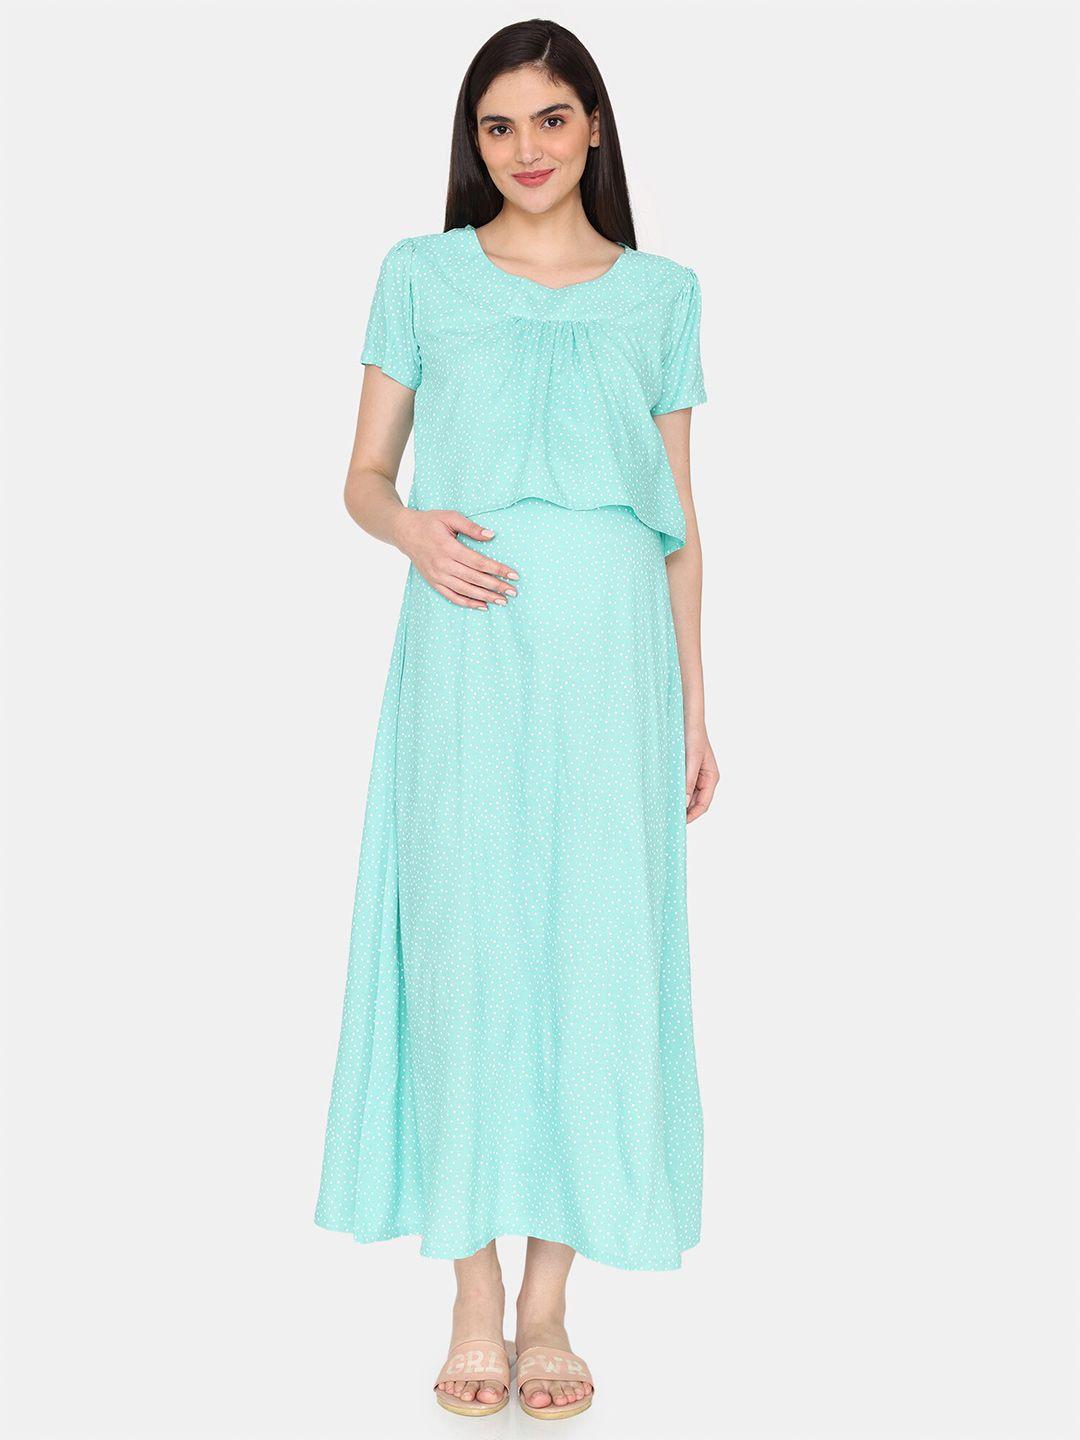 coucou by zivame polka dots printed maternity maxi nightdress